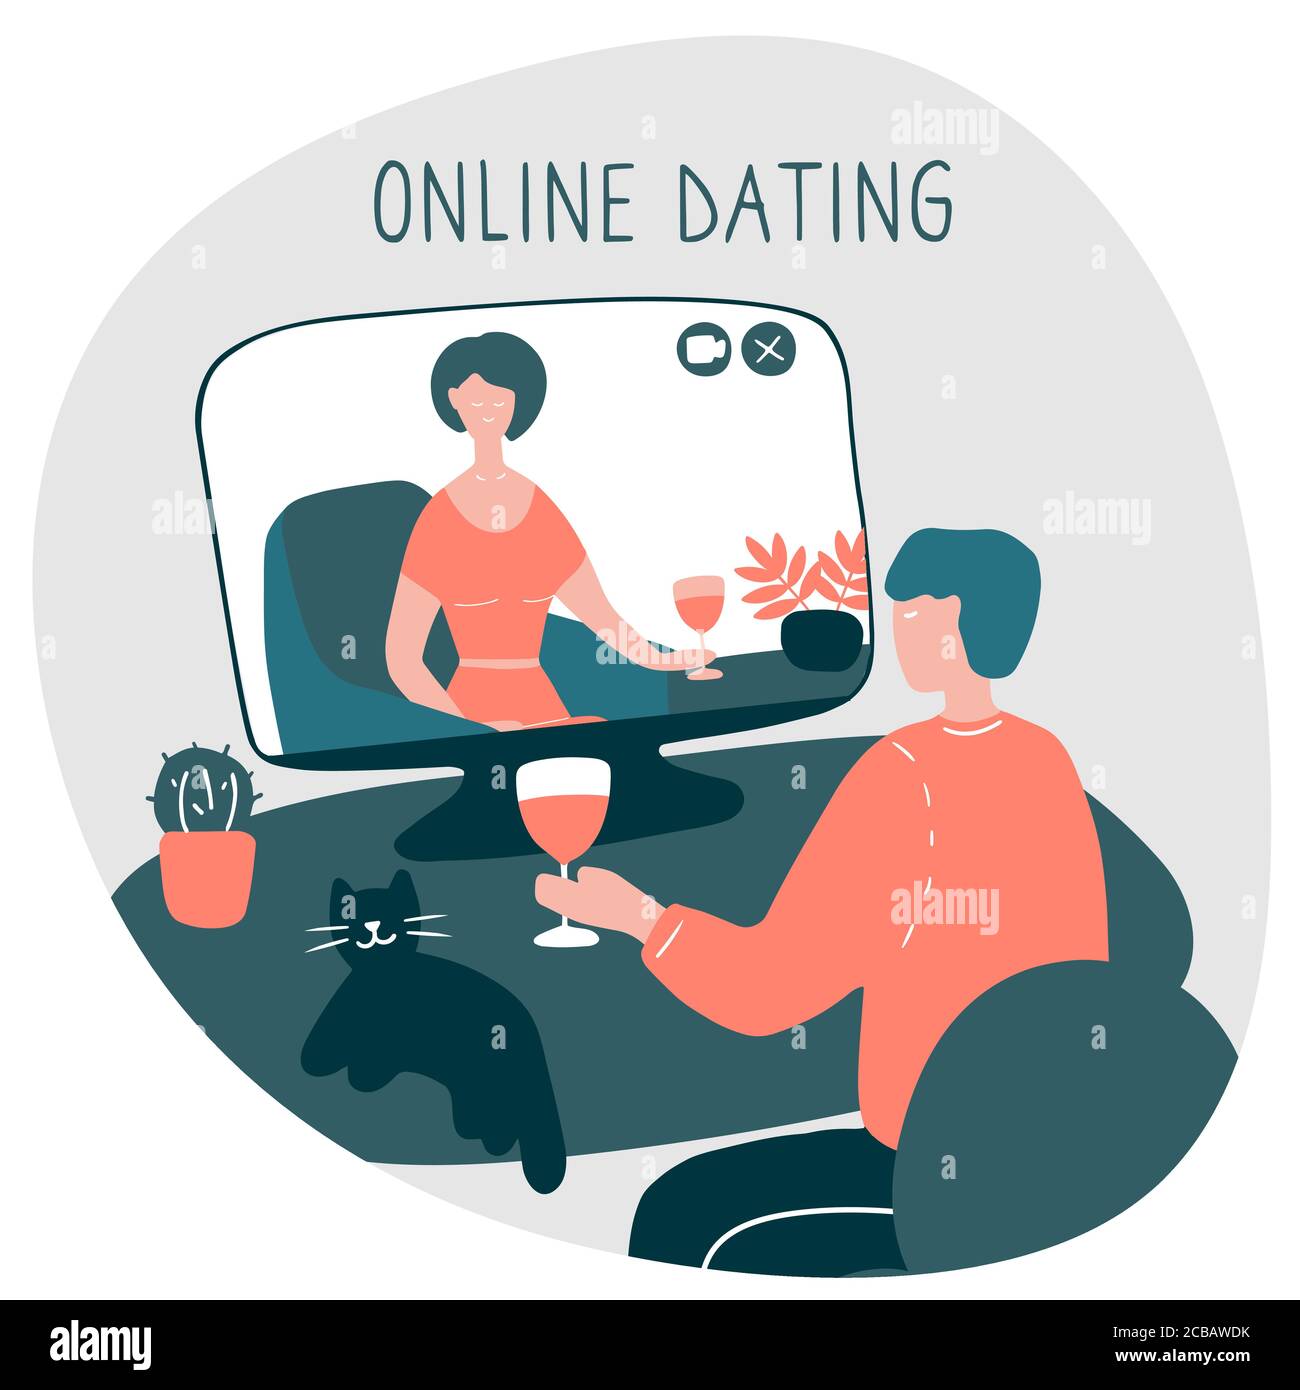 Young man sits in front of computer and talks with woman online. Girl and guy met online and build relationship at distance. Dating websites, internet Stock Vector